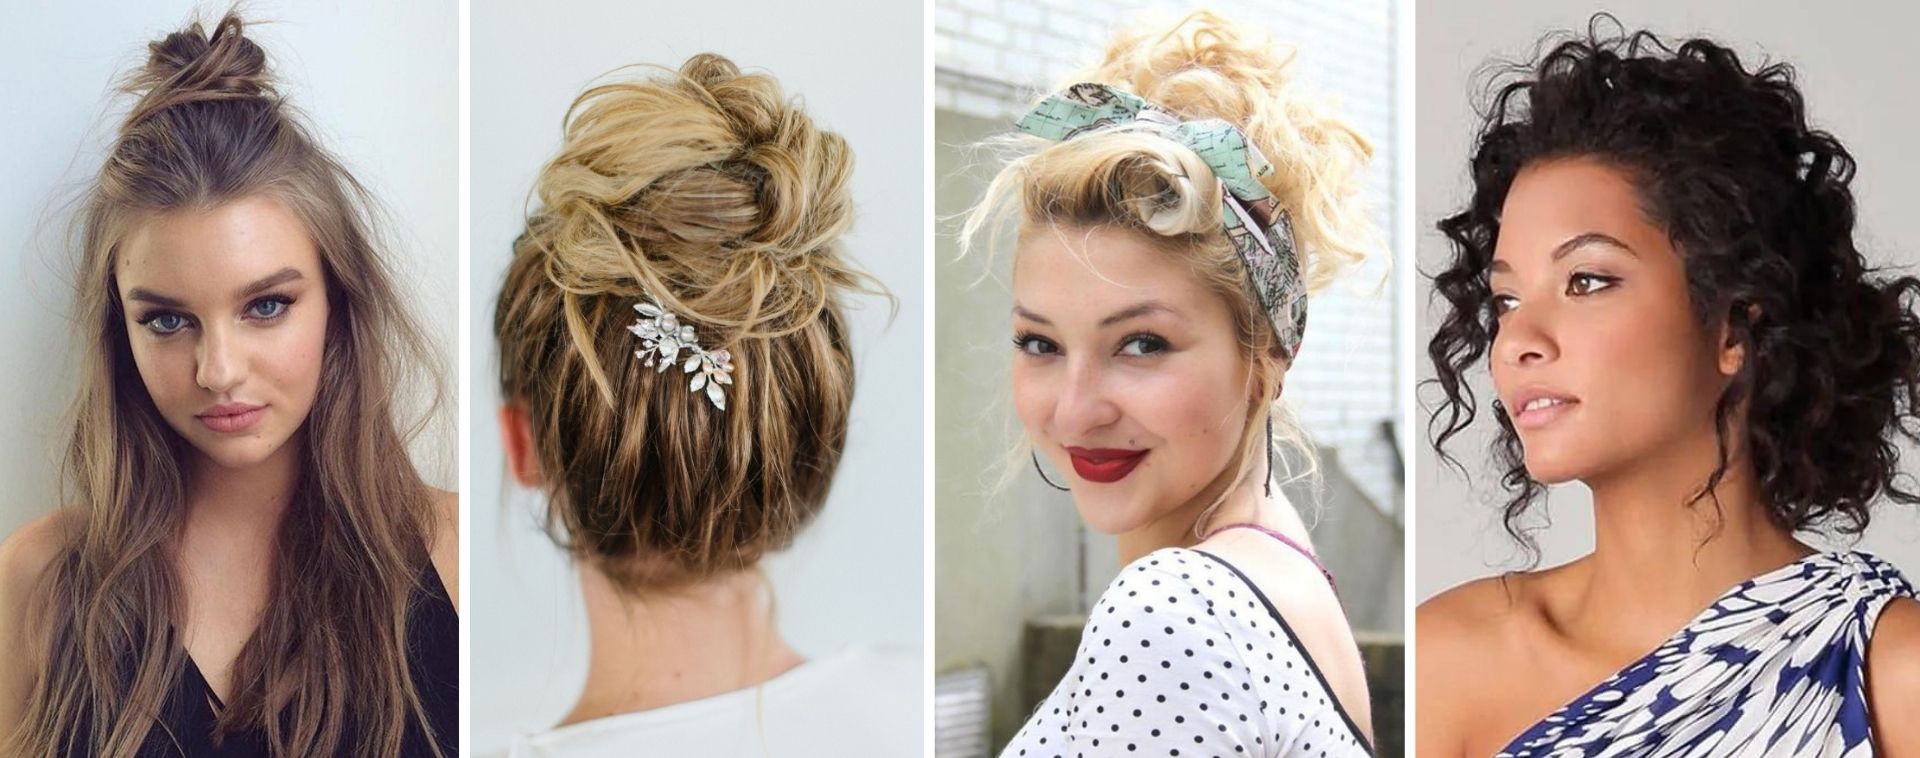 Short Prom Hairstyles: 24 Gorgeous Styles